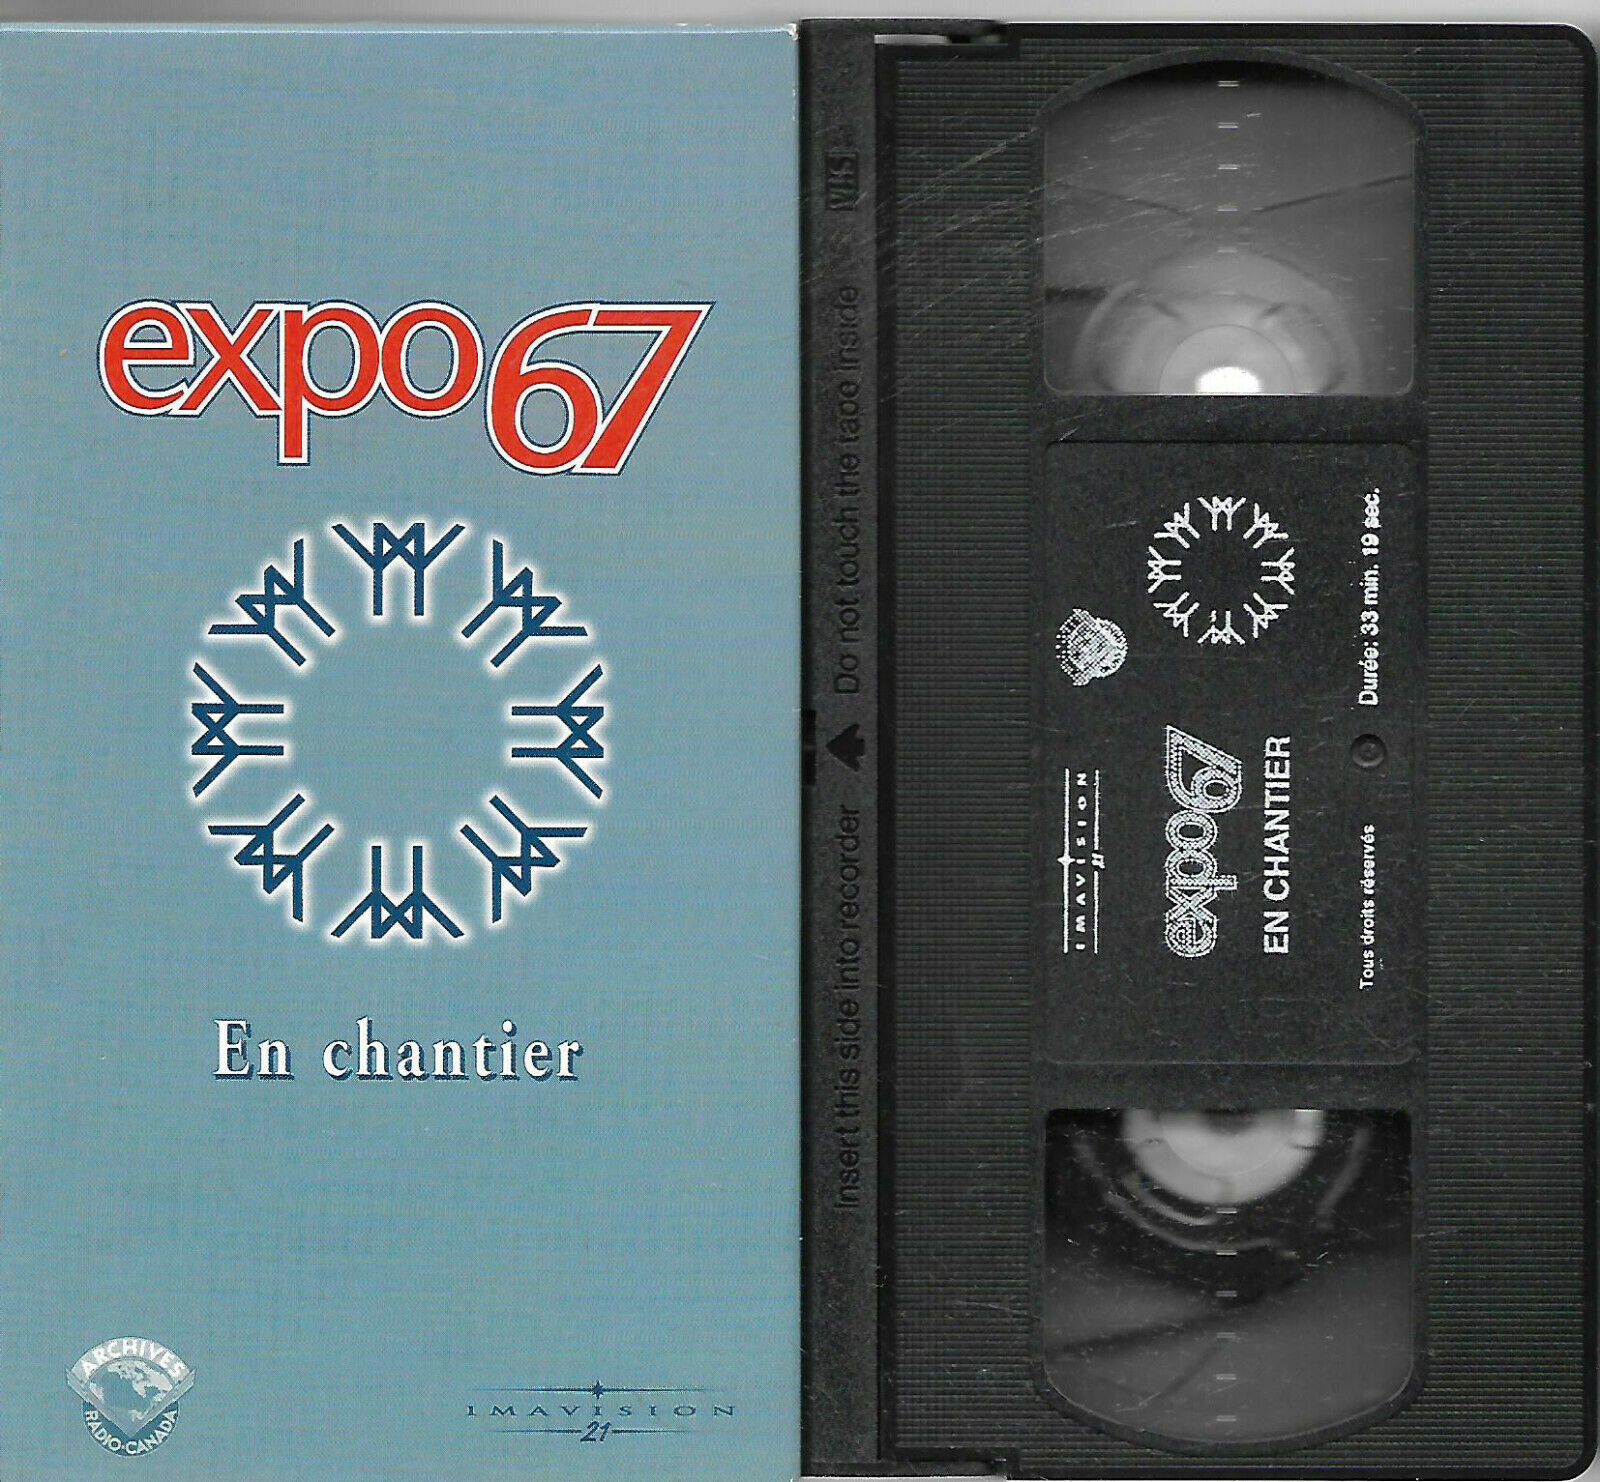 VINTAGE VHS VIDEO CASSETTE EXPO67 MONTREAL IN CONSTRUCTION-IN MUSIC & IN FRENCH